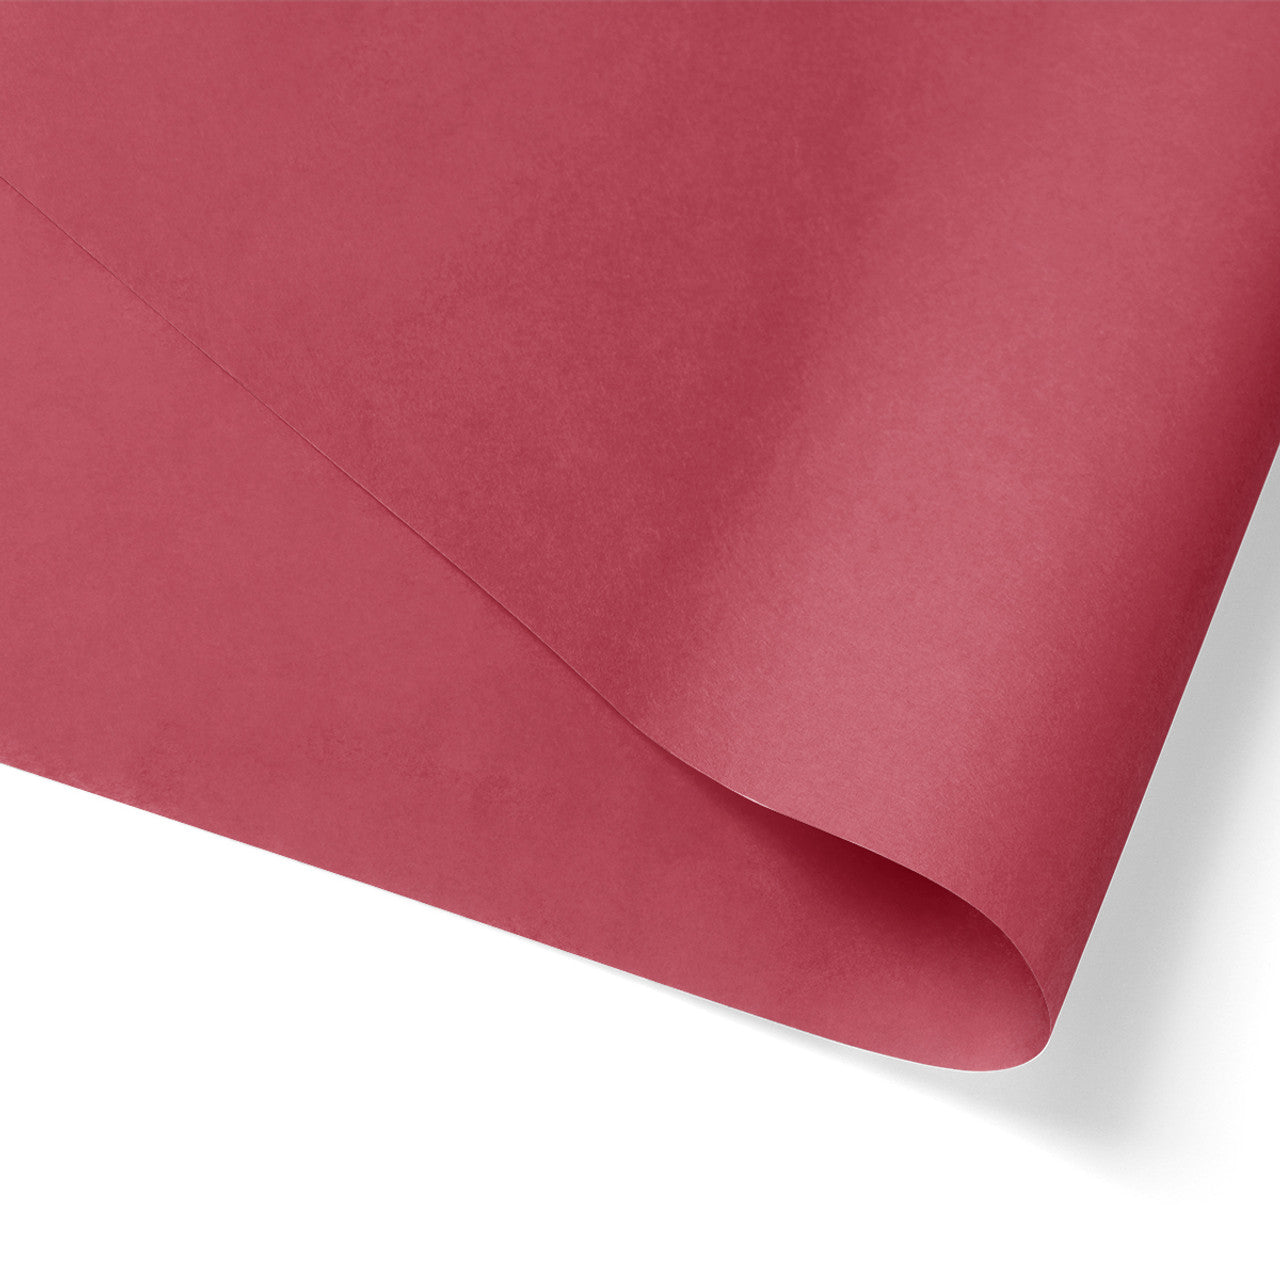 480pcs 20x30 inches Red Solid Tissue Paper; $0.07/pc